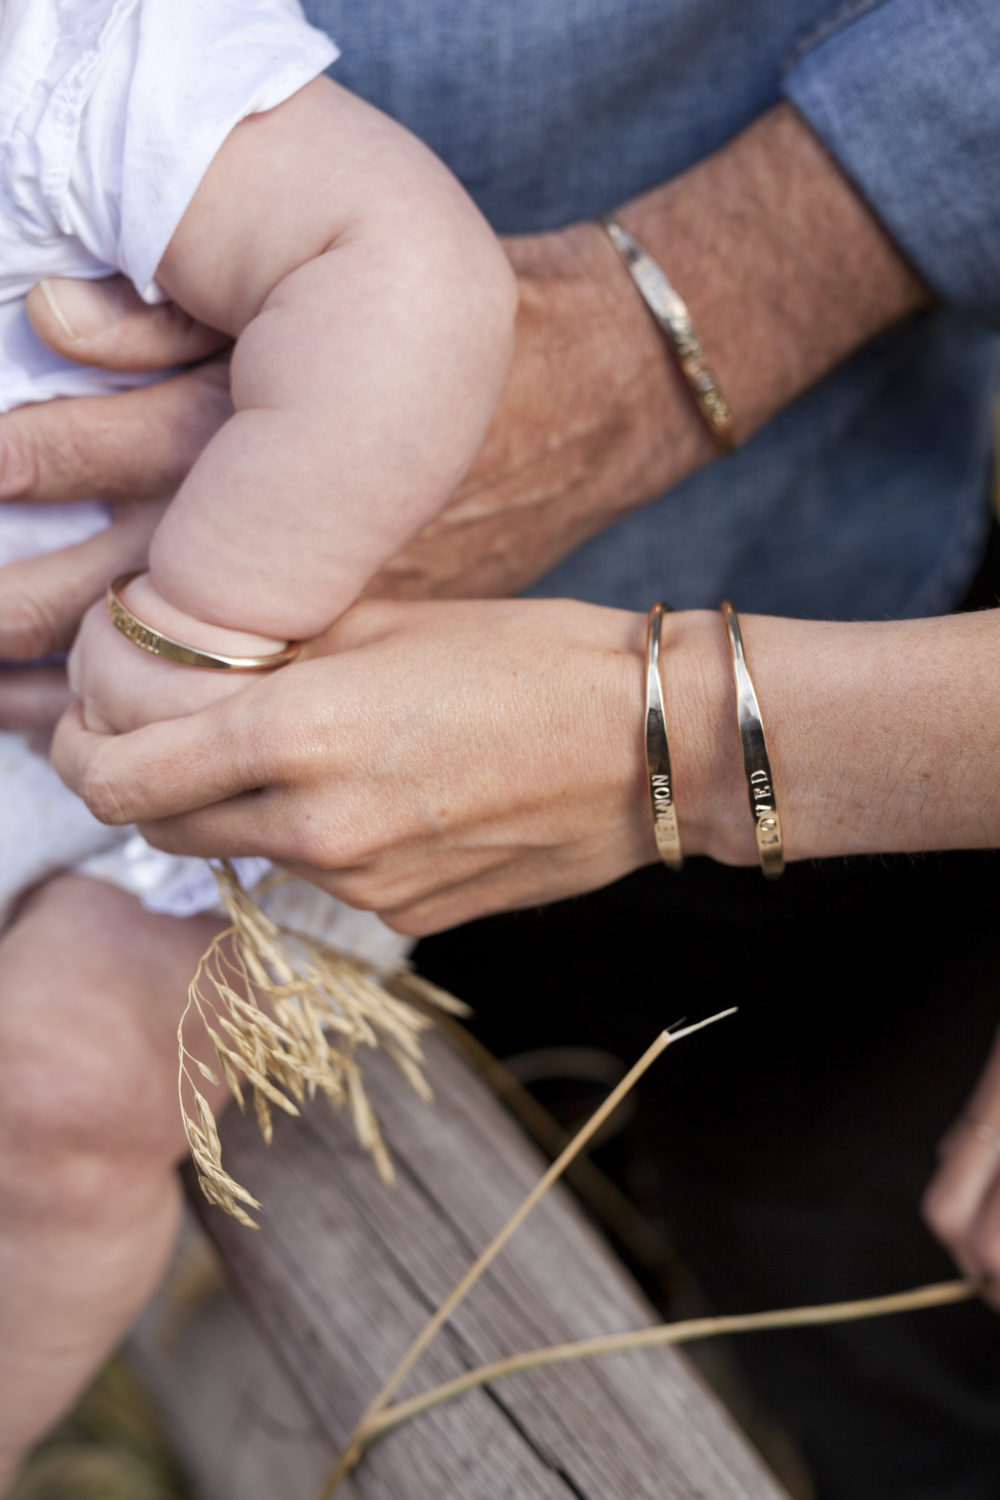 A close up on a father, mother and baby's arms together all wearing the custom stamped bracelets.